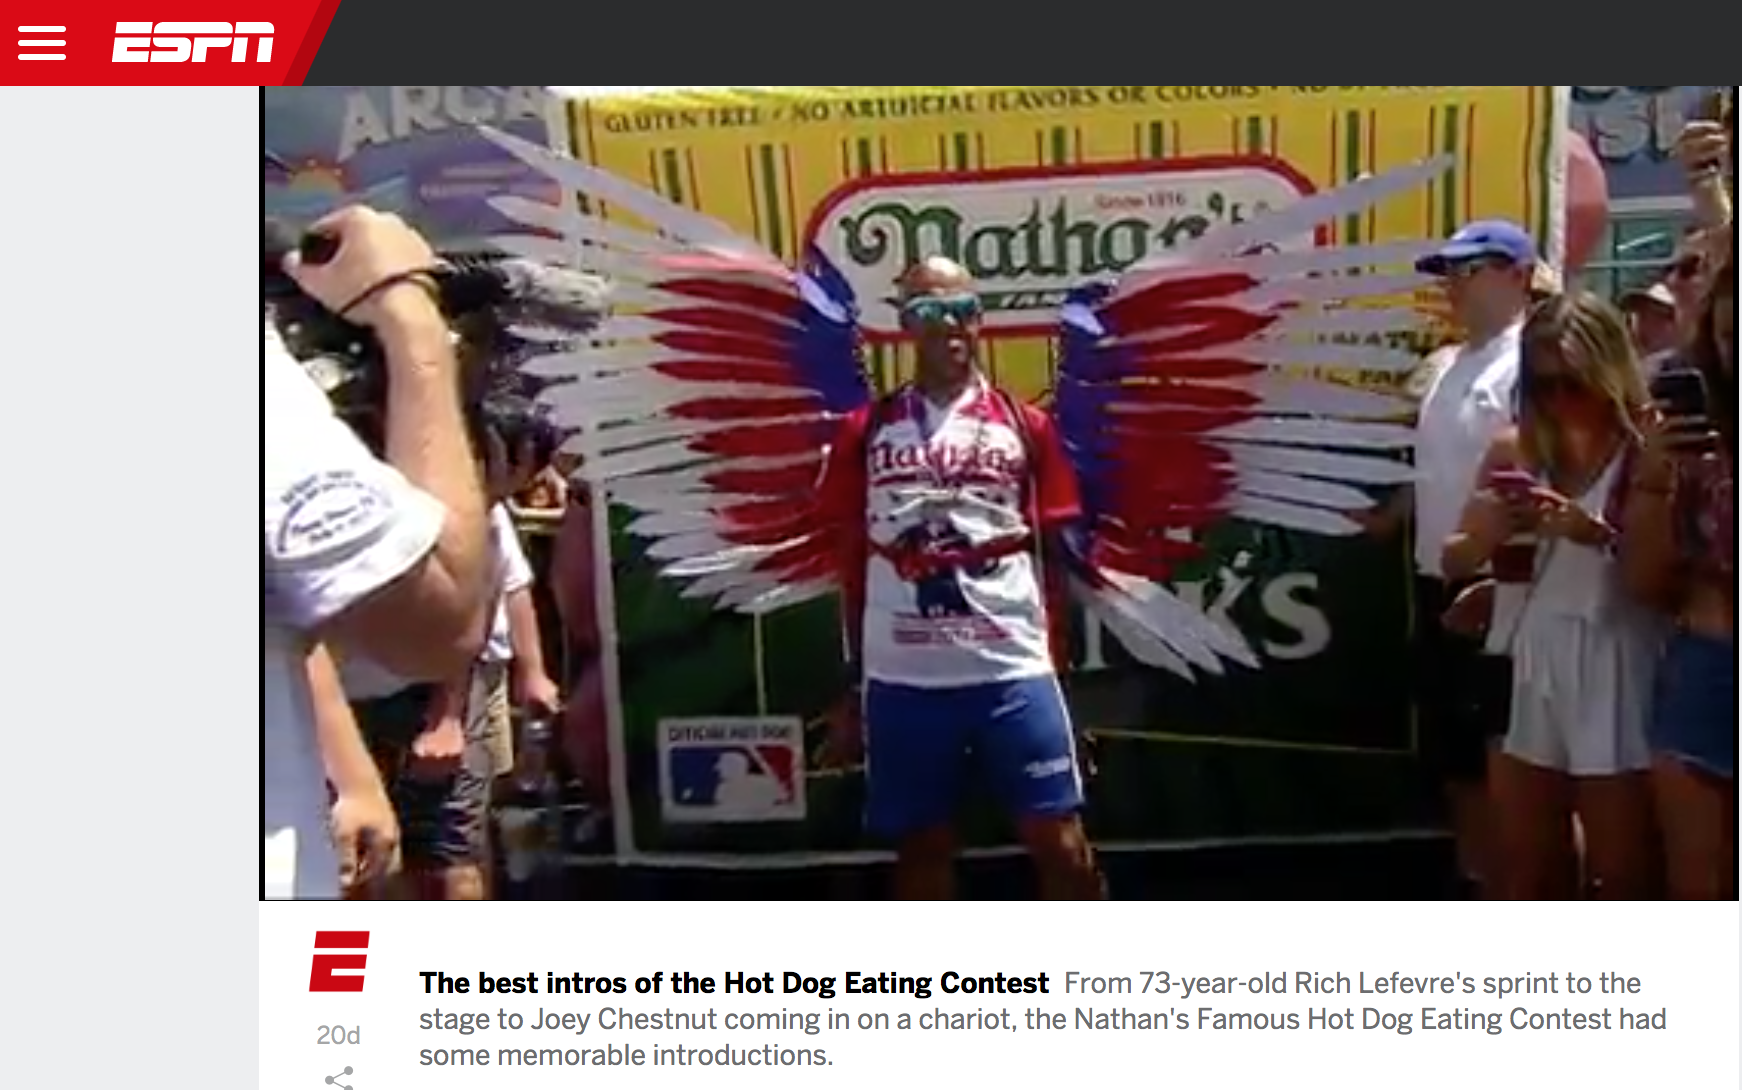   As seen on&nbsp; ESPN&nbsp; (2017), these kinetic wings were created for the Fourth of July Nathan's Famous Hot Dog Eating Contest on Coney Island. Click below to watch the video.  